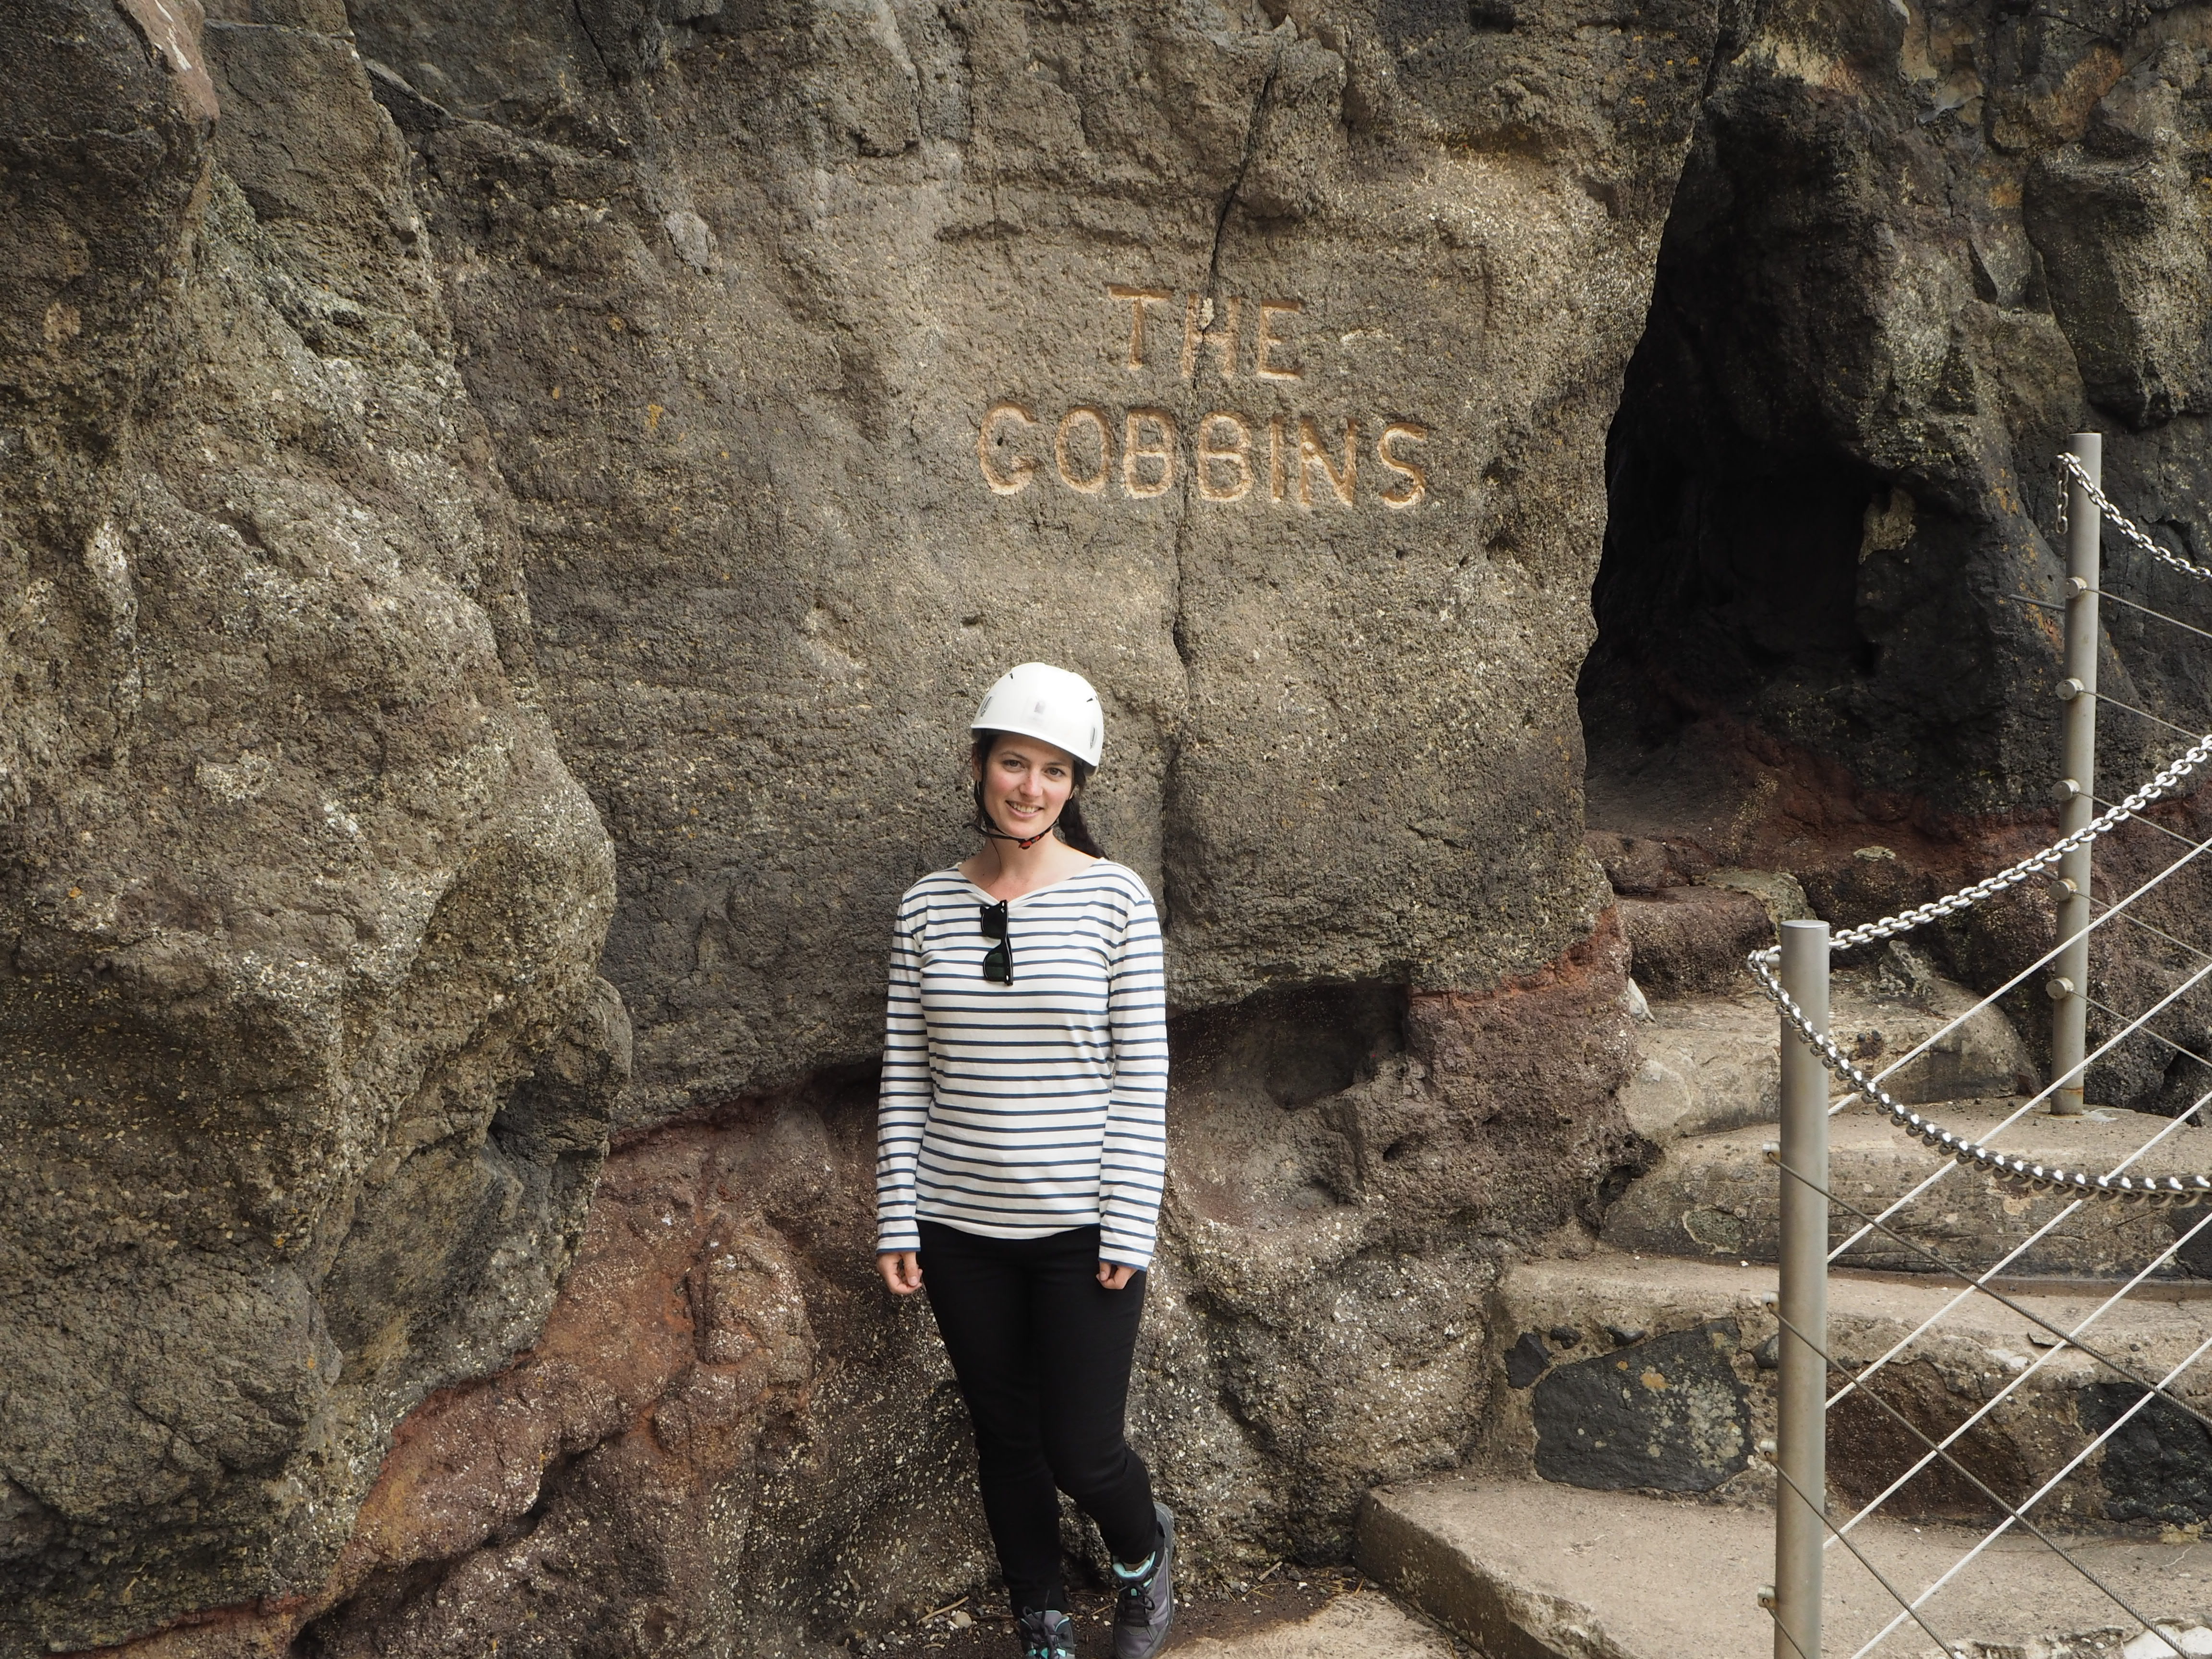 Elle Croft at The Gobbins Cliff Walk - Beyond the City Break in Belfast with Flybe and Avis